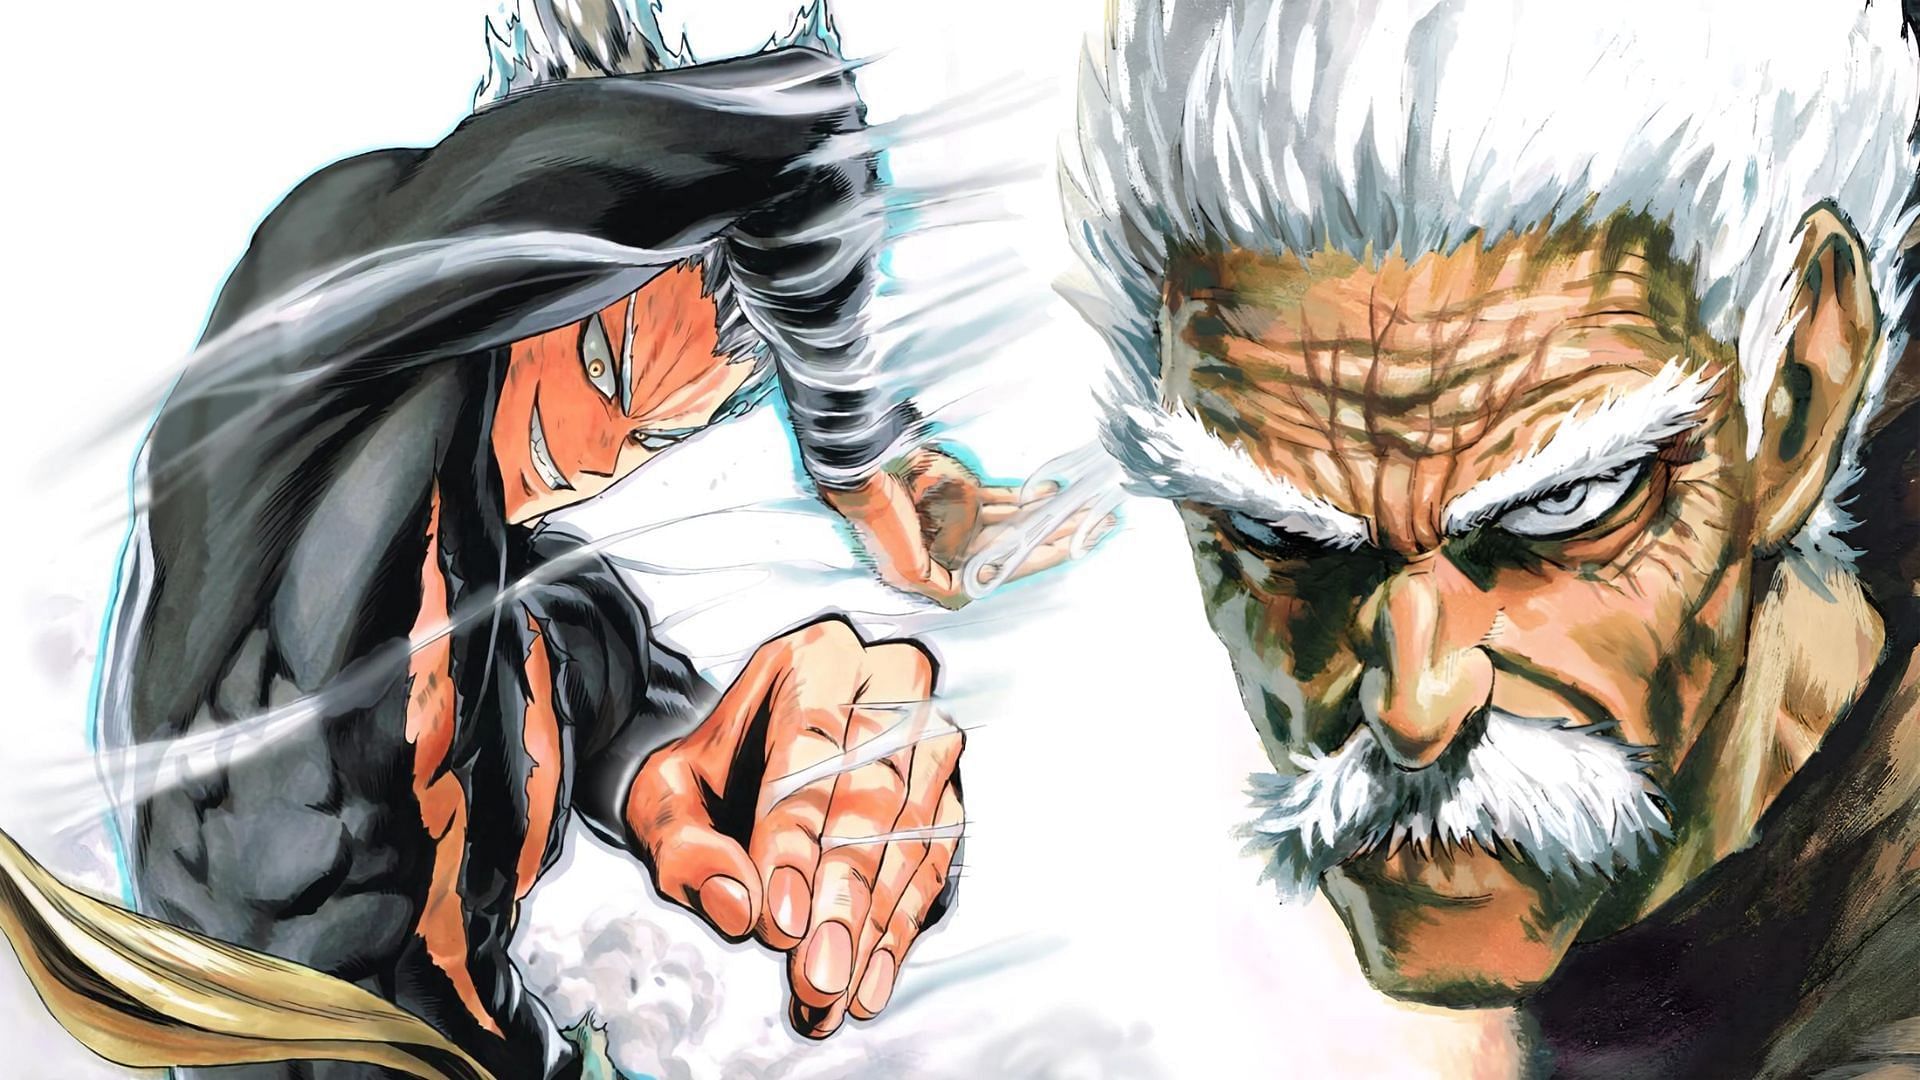 One Punch Man volume 30 cover features Garou and Bang in new avatar